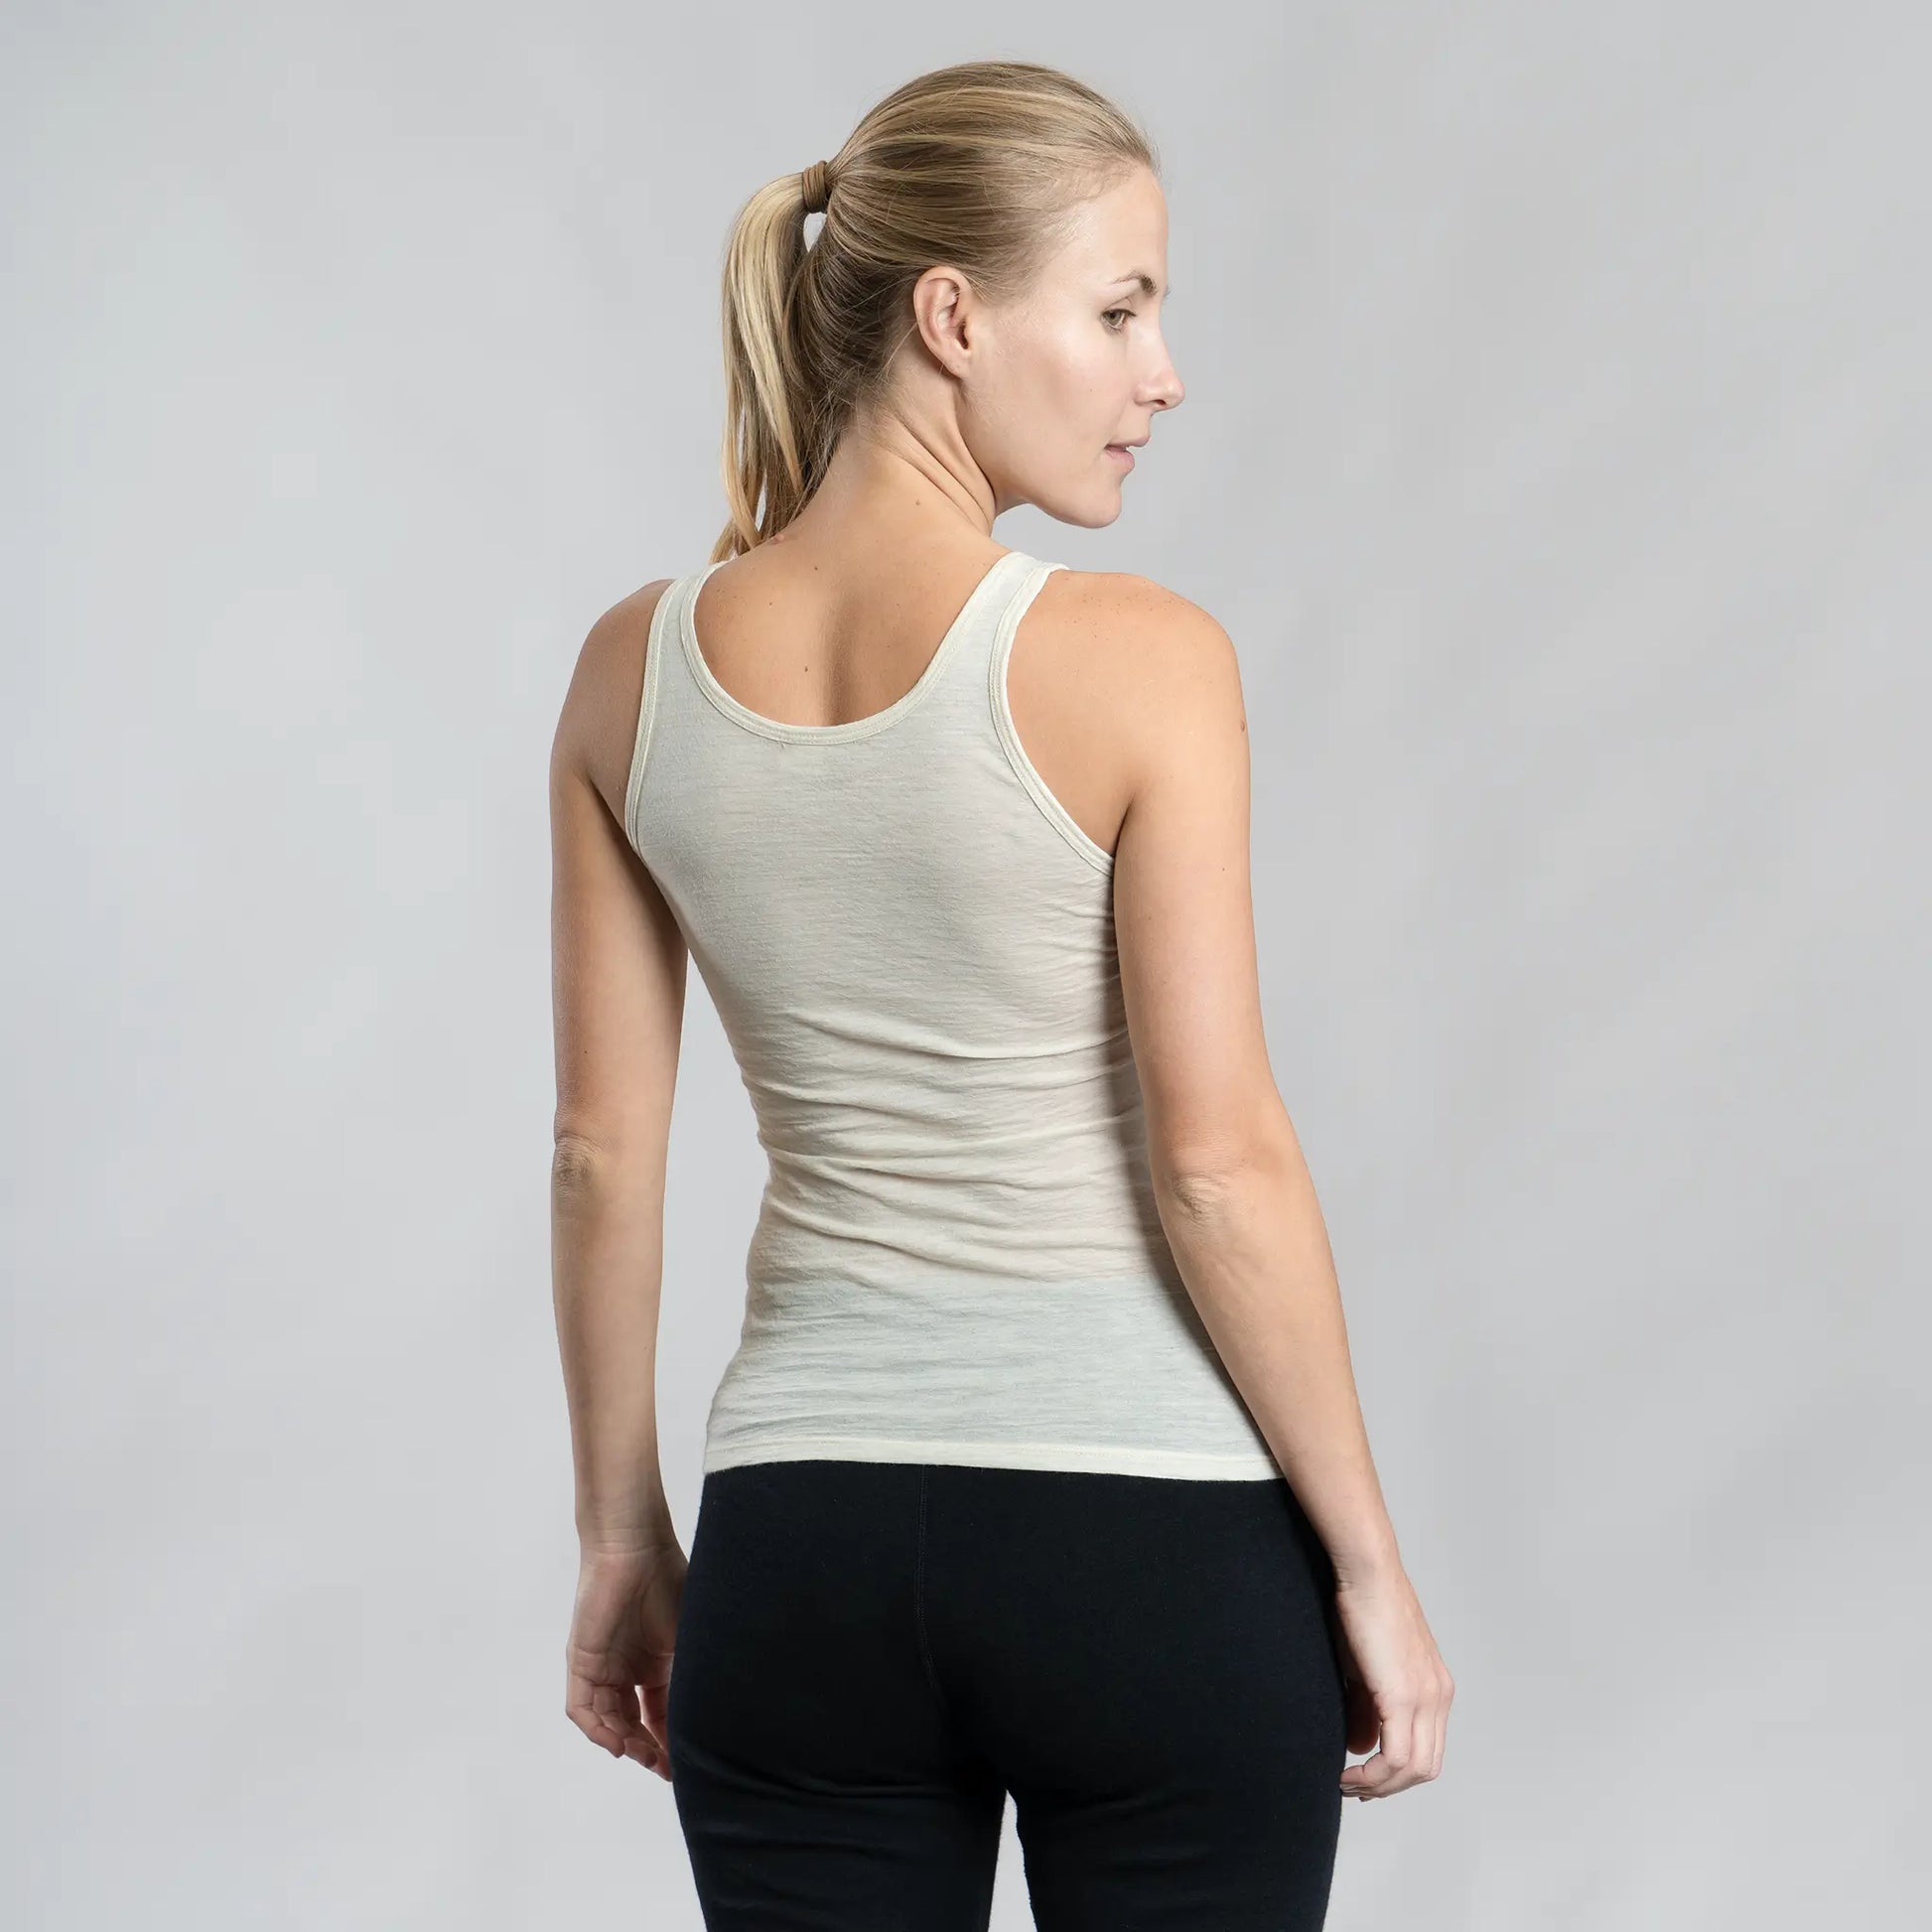 womens moisture wicking tank top ultralight color natural white